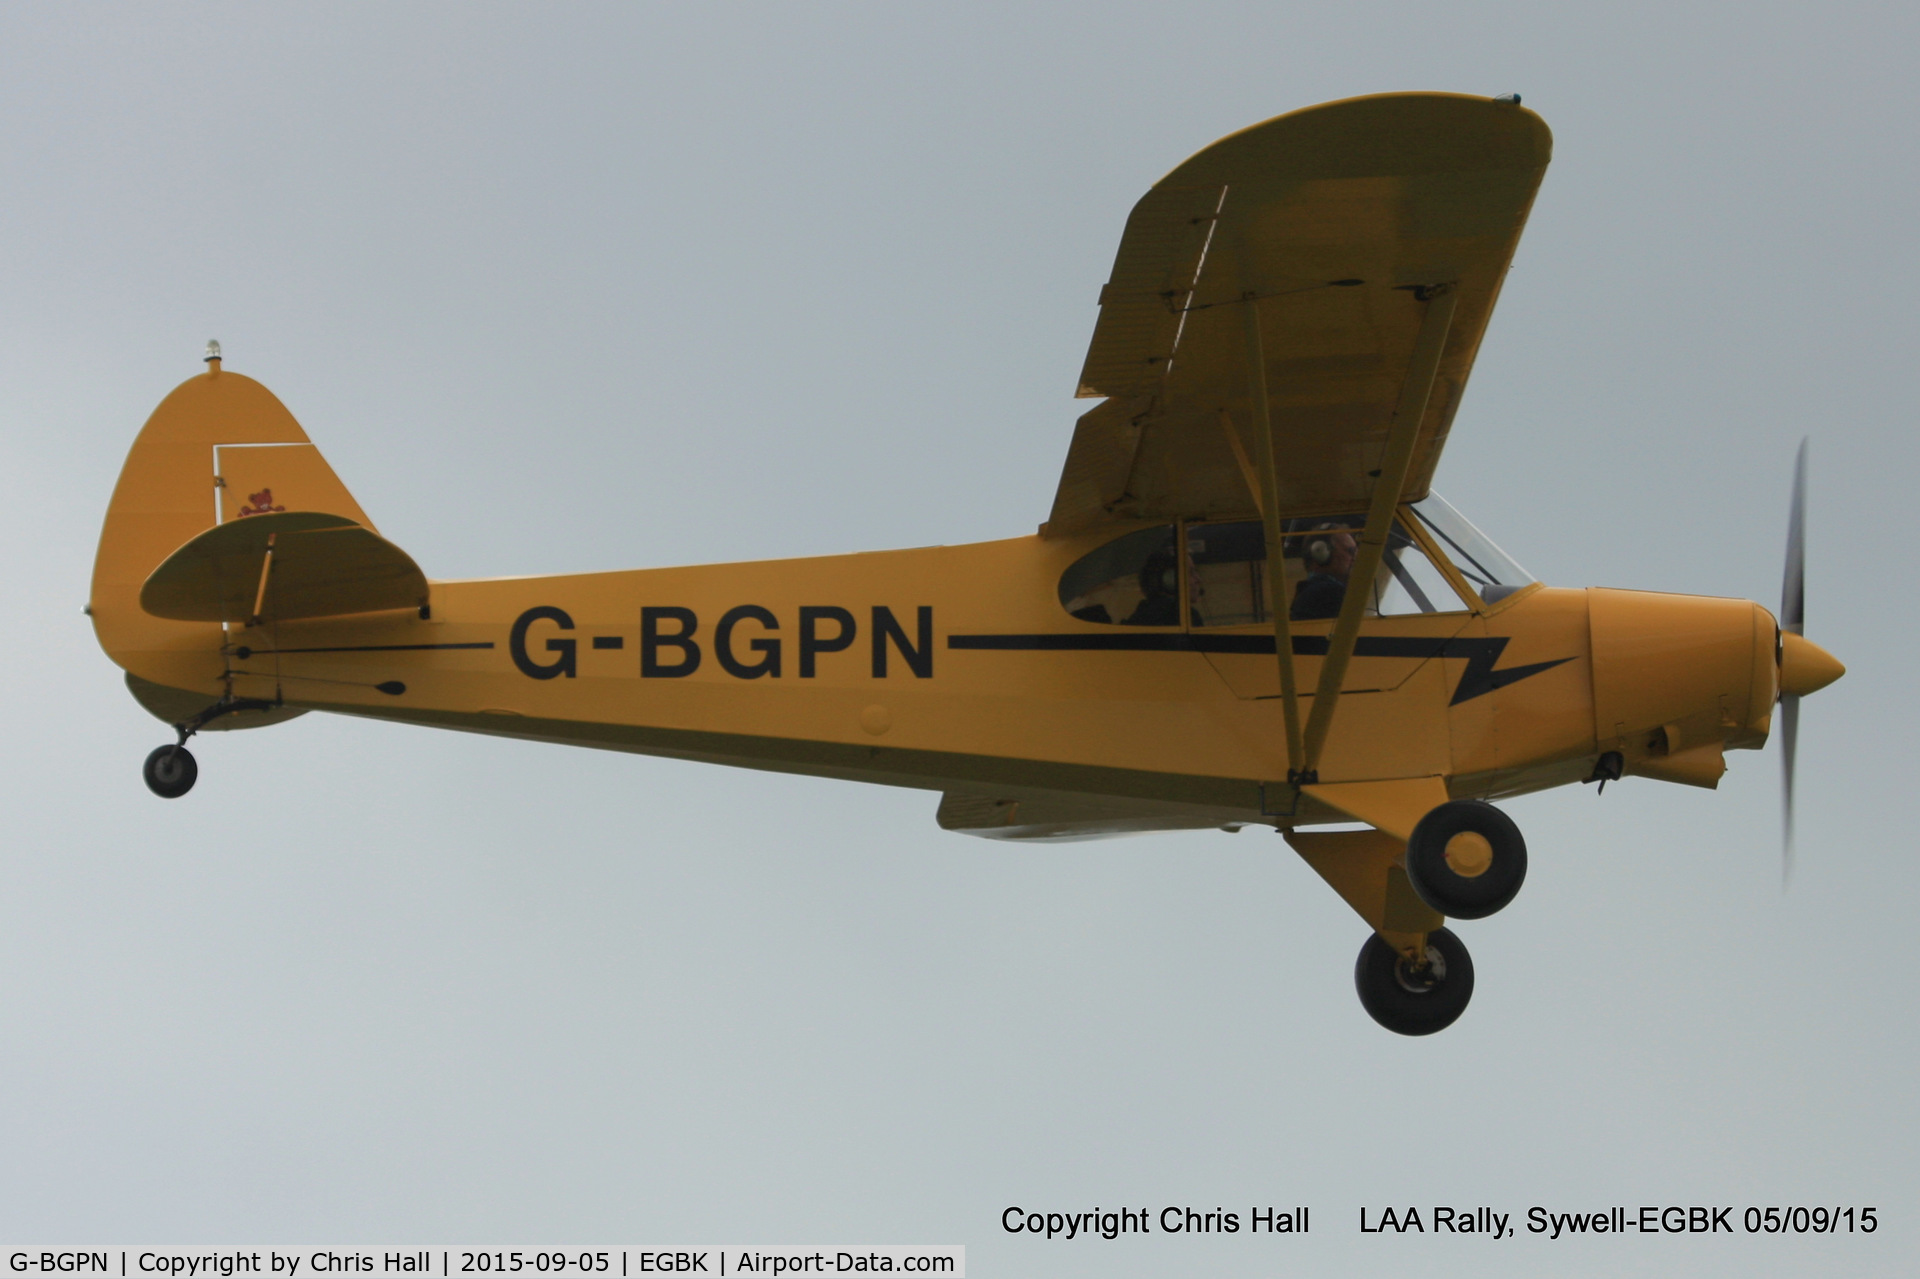 G-BGPN, 1978 Piper PA-18-150 Super Cub C/N 18-7909044, at the LAA Rally 2015, Sywell